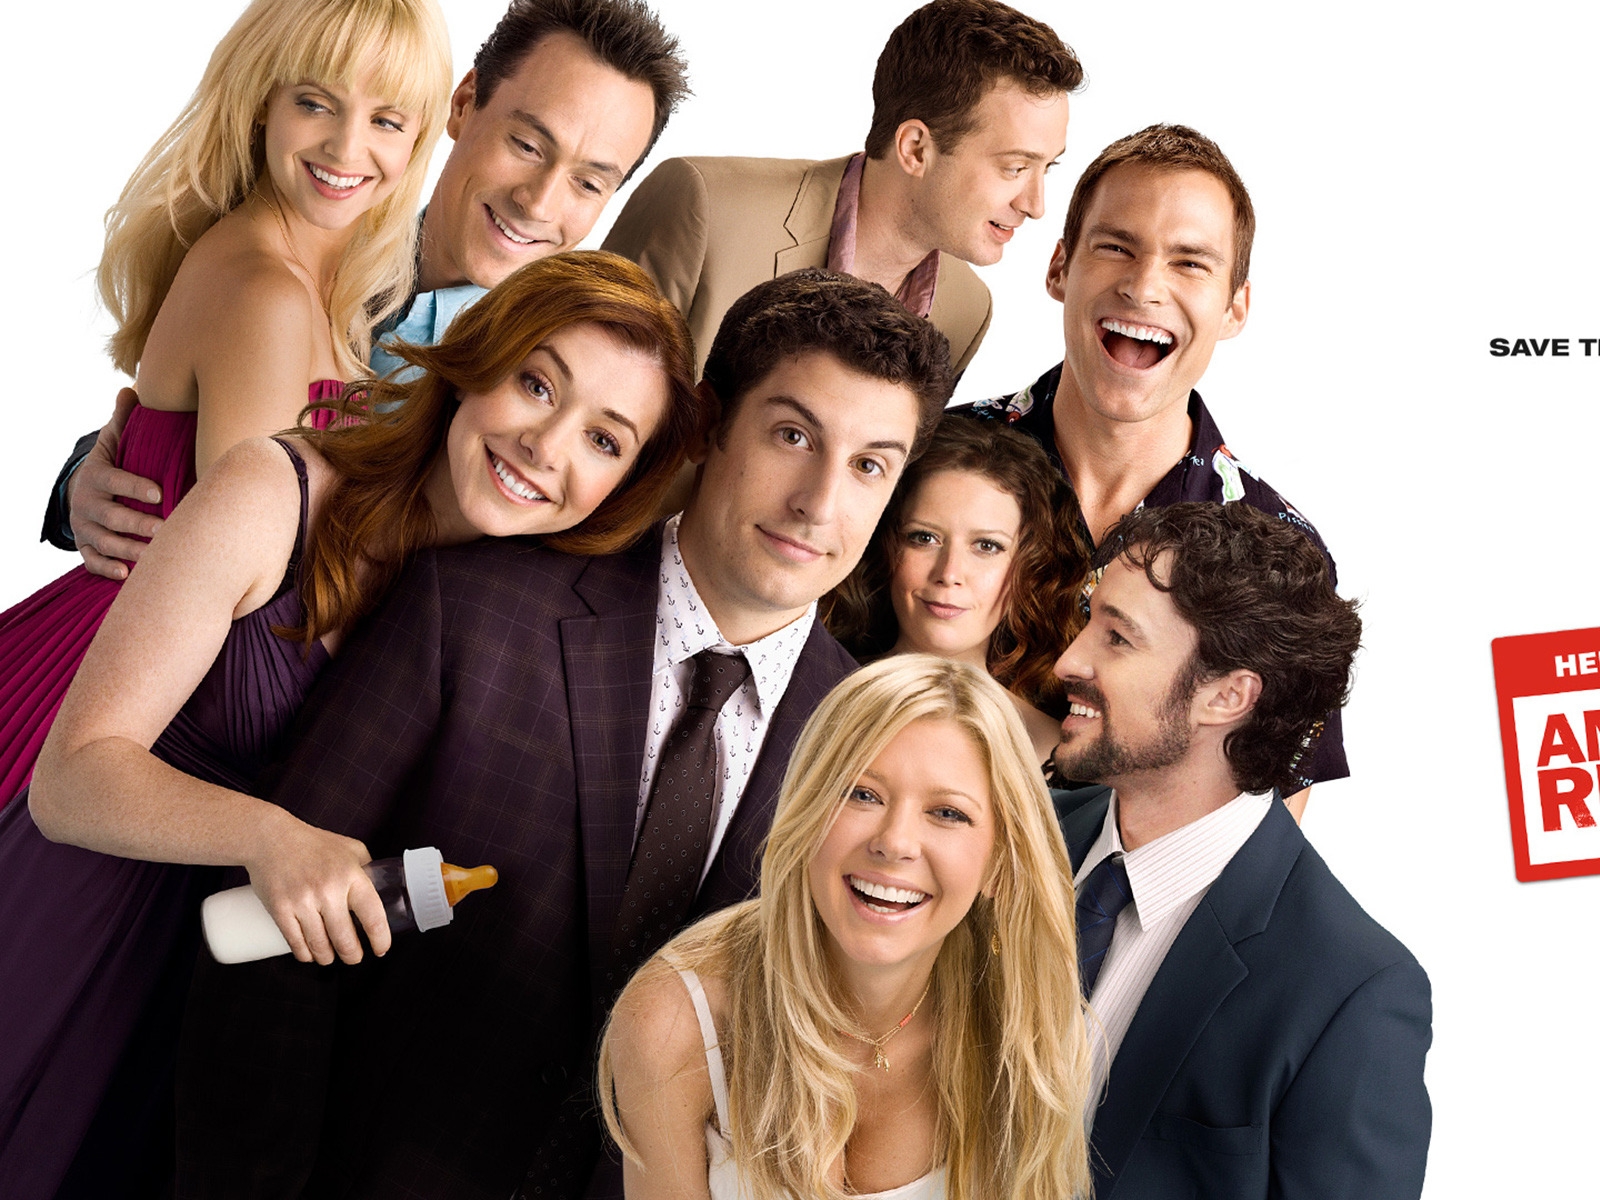 American Reunion for 1600 x 1200 resolution